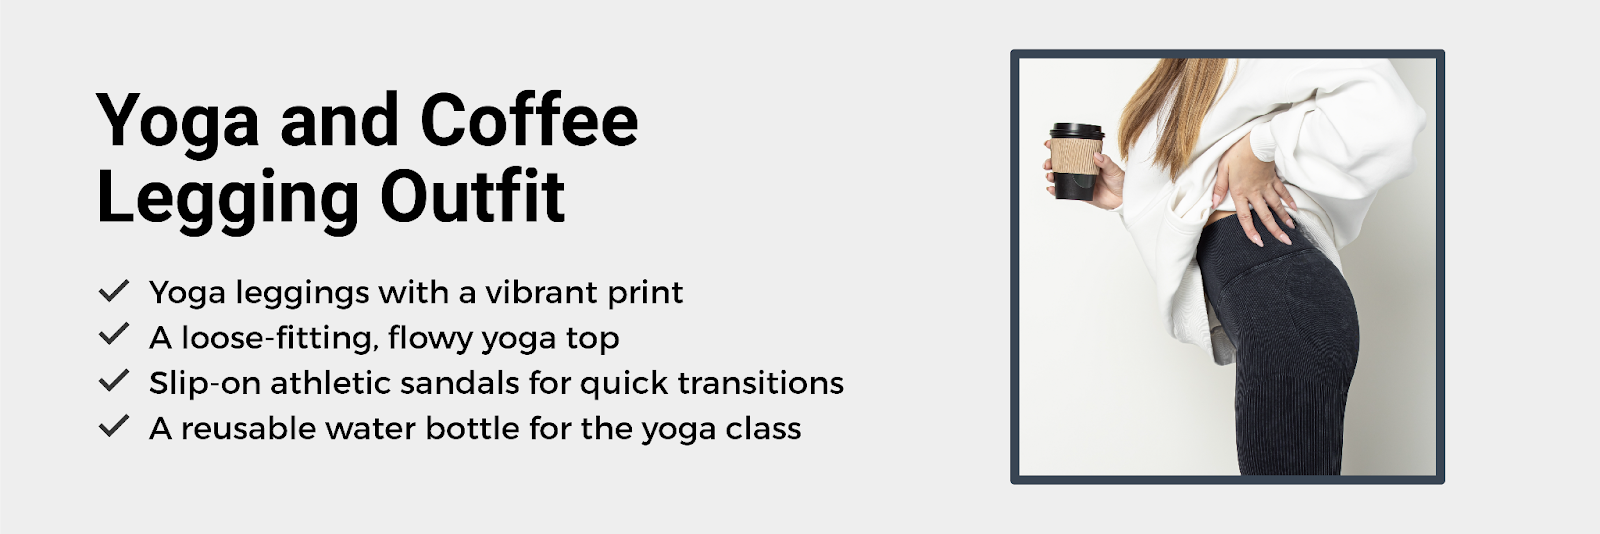 Yoga and coffee legging outfit